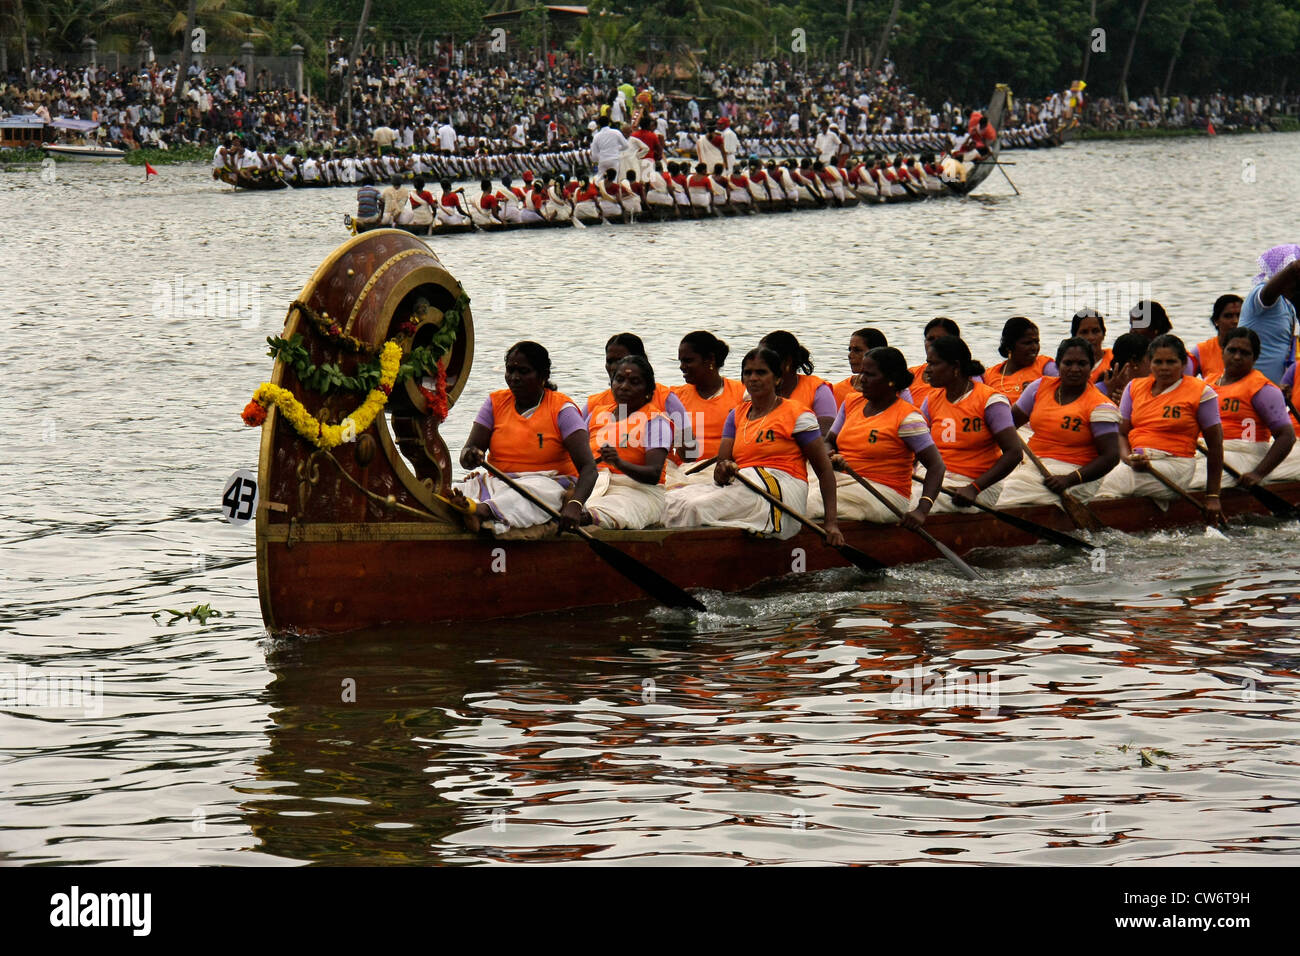 rowers from nehru trophy snakeboat race  or chundan vallam race in alappuzha  back waters formerly known  alleppey,kerala,india,snake boat race Stock Photo